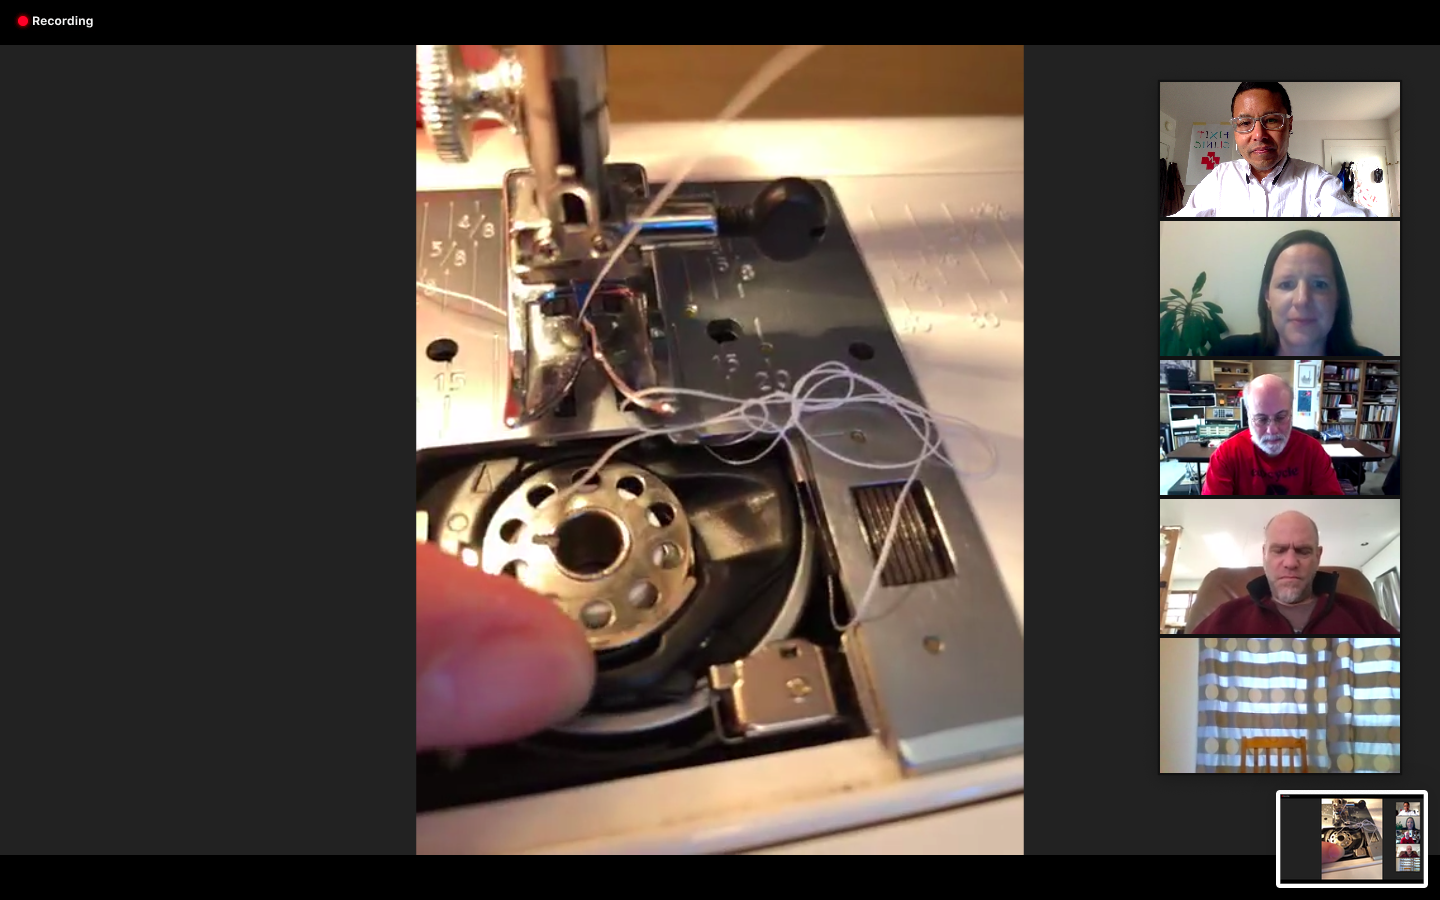 Screenshot of Zoom call with participants looking at a sewing machine bobbin